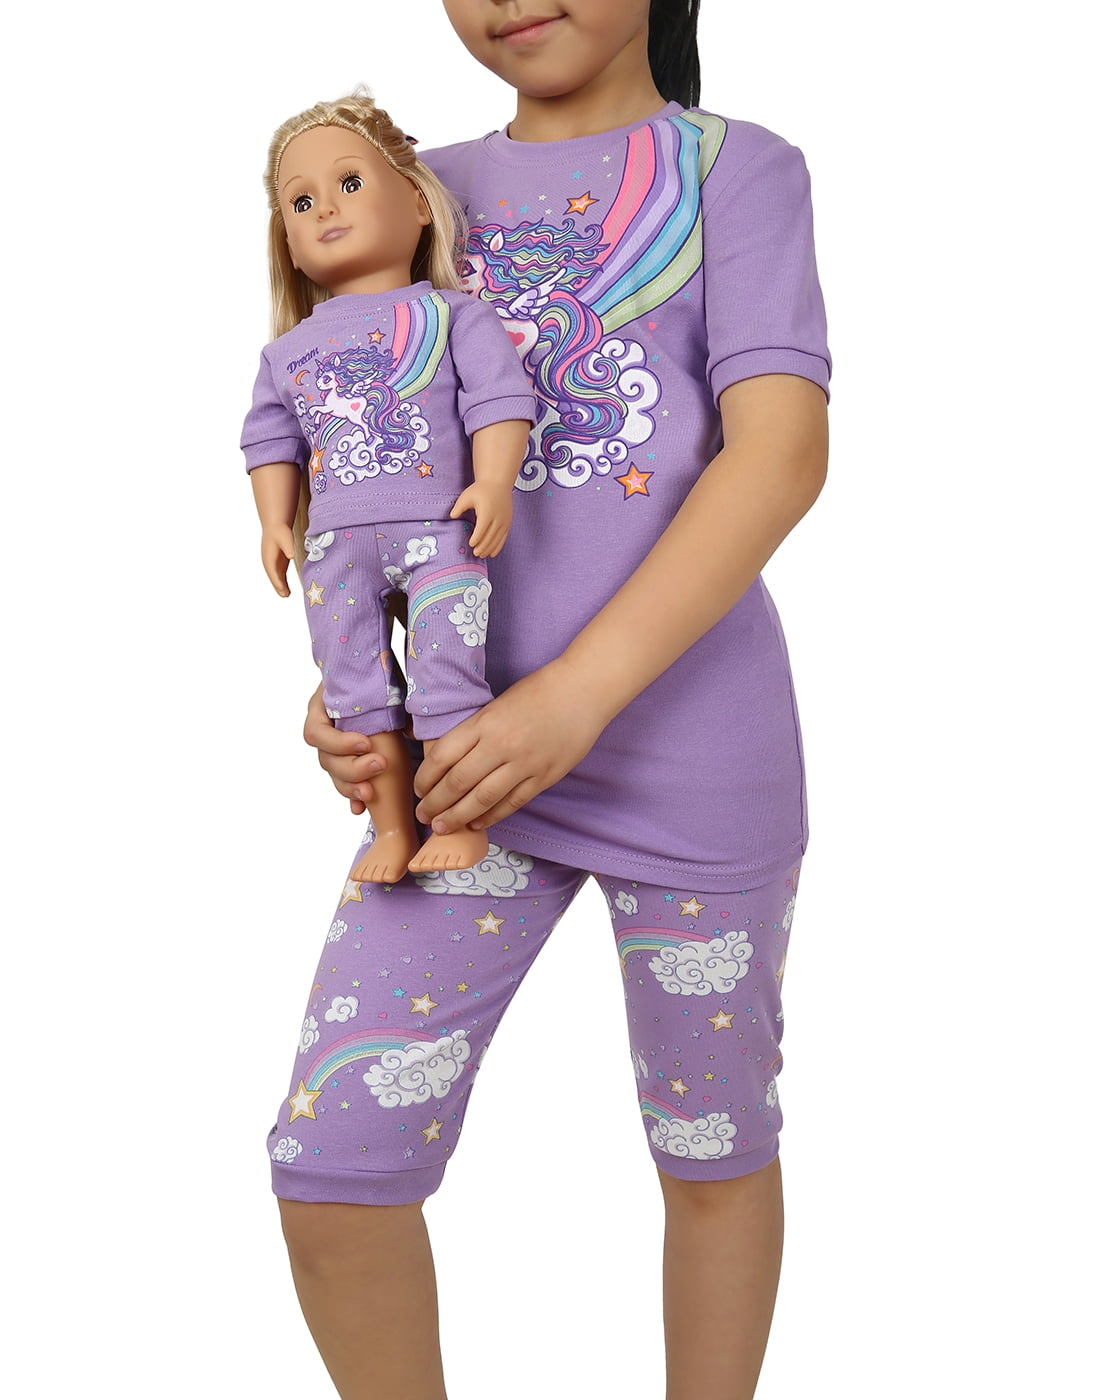 HDE Girls Pajamas - Pajama Set with for Girl with Matching Doll Outfit -  100% Cotton, Breathable Kids PJ Sets with Cute Unicorn Design - Doll  Pyjamas Fit American Girl & 18 Dolls 